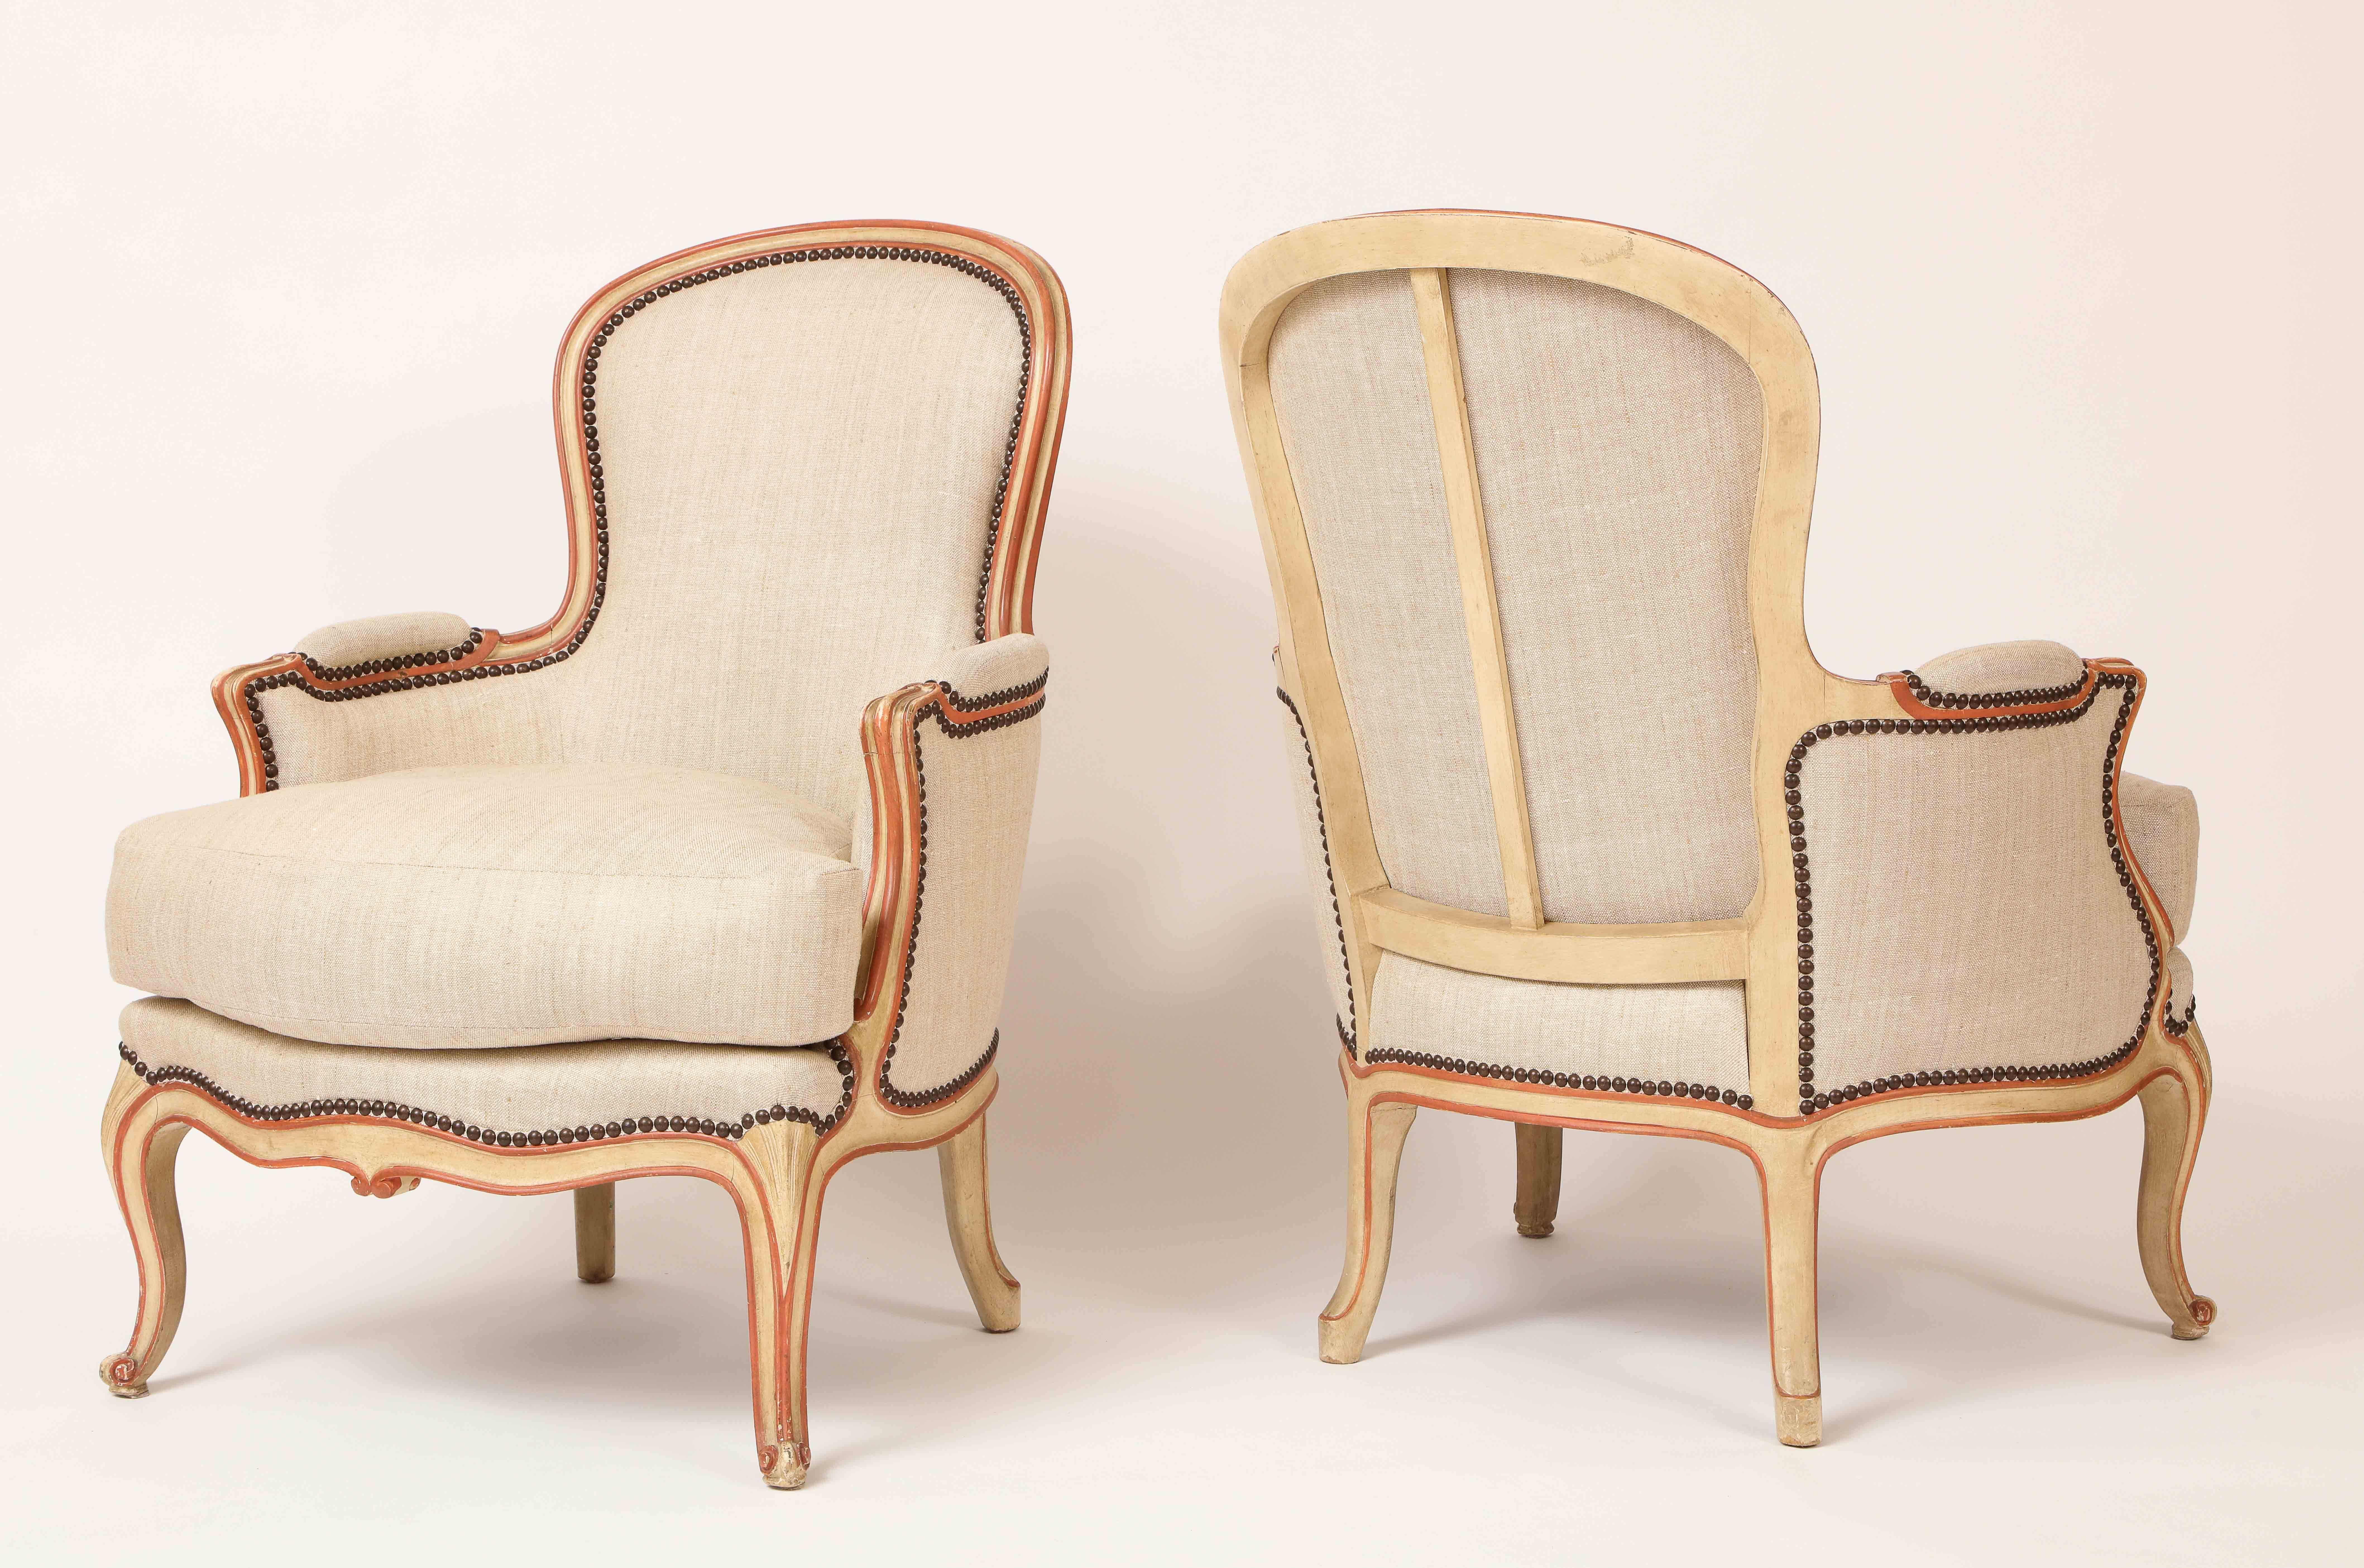 This pair of French armchairs (bergeres) in the Louis XV taste, made of painted beech wood, each has a curved back and arms, raised on cabriole legs, all retaining its original painted scheme of cream and orange pink. These chairs were made by